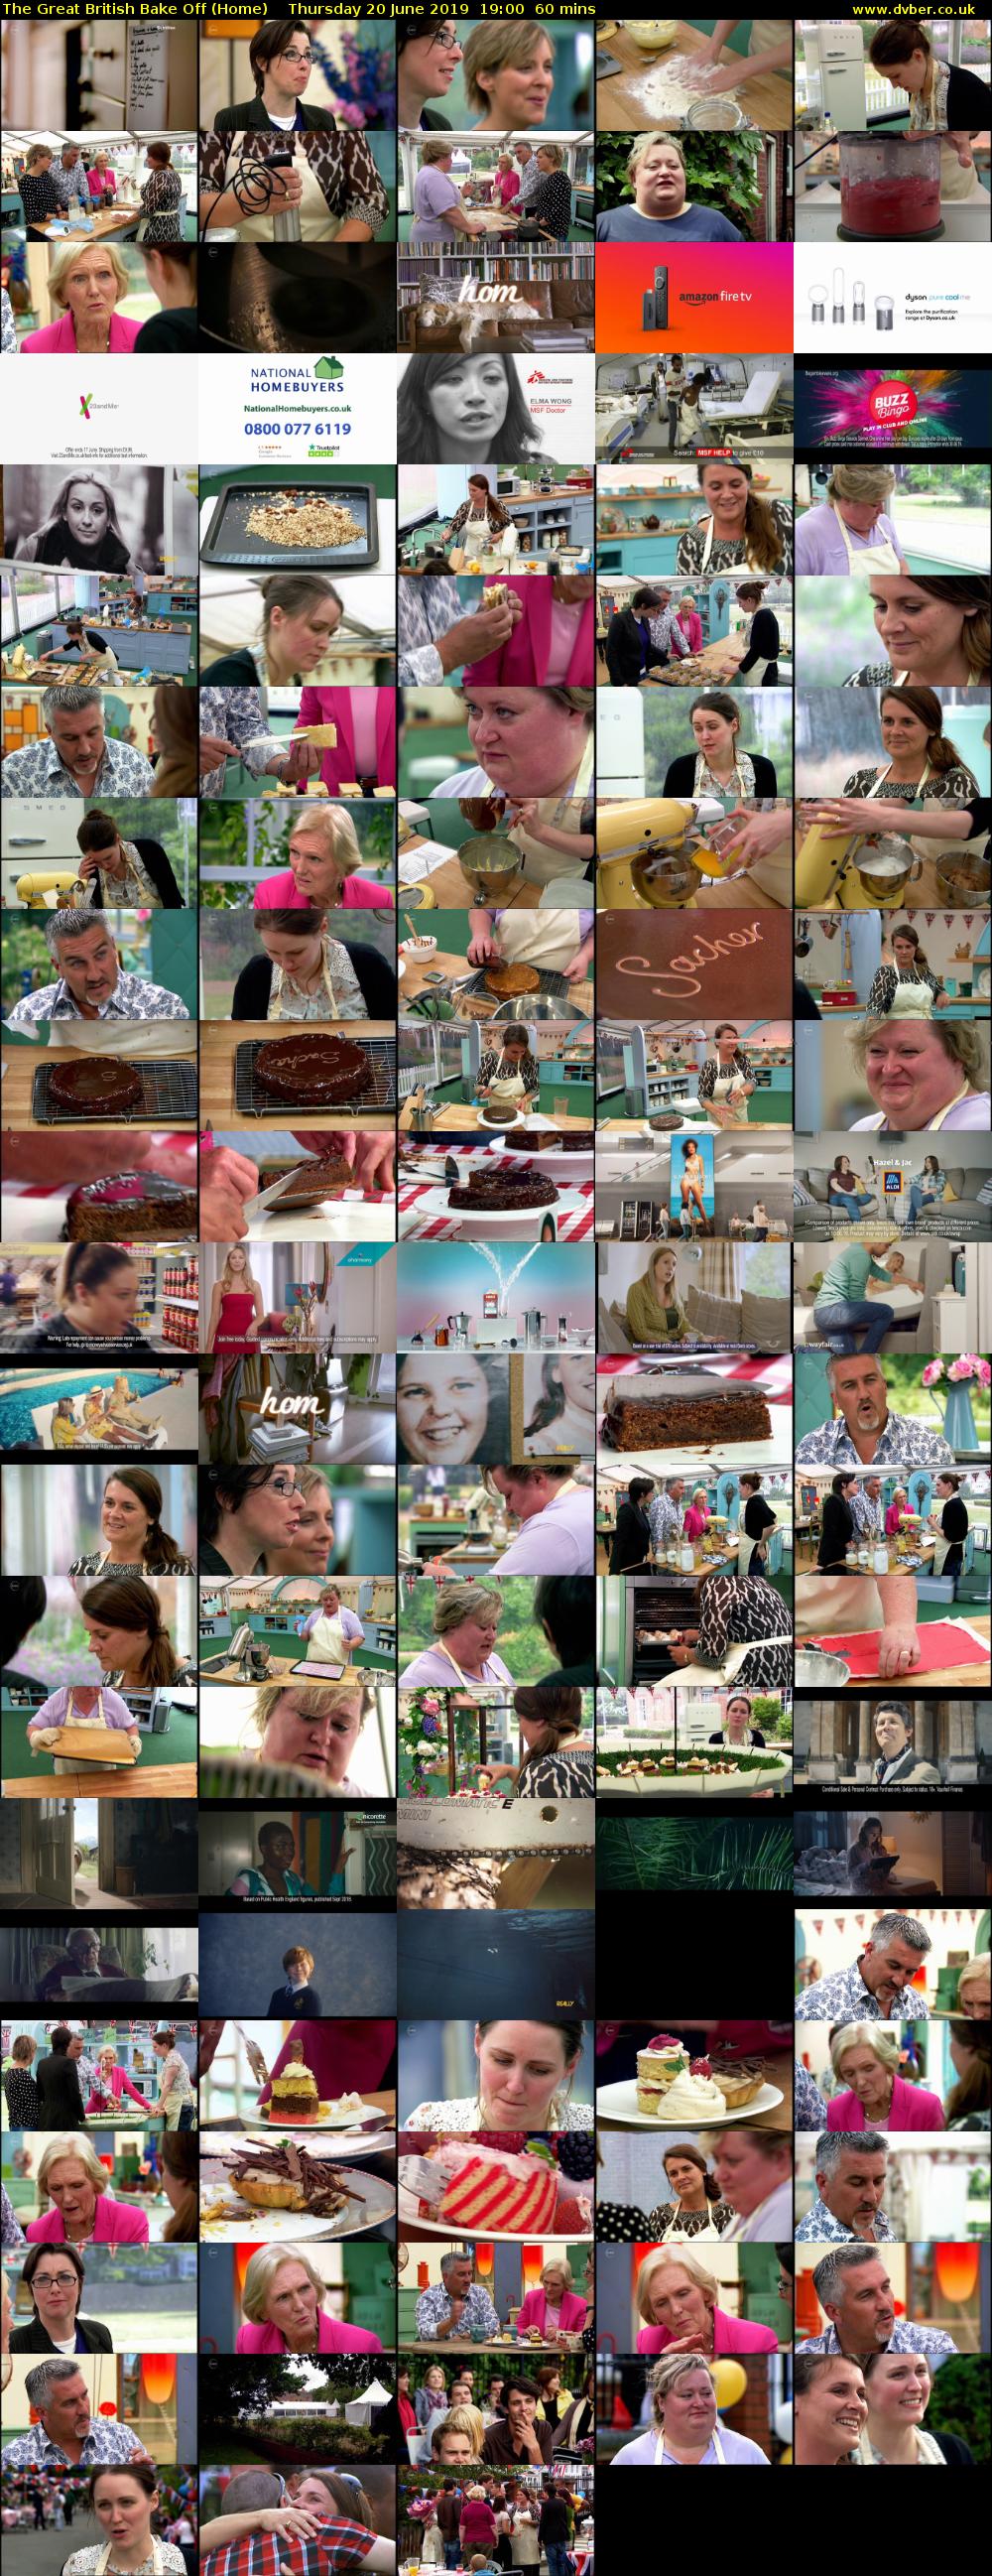 The Great British Bake Off (Home) Thursday 20 June 2019 19:00 - 20:00